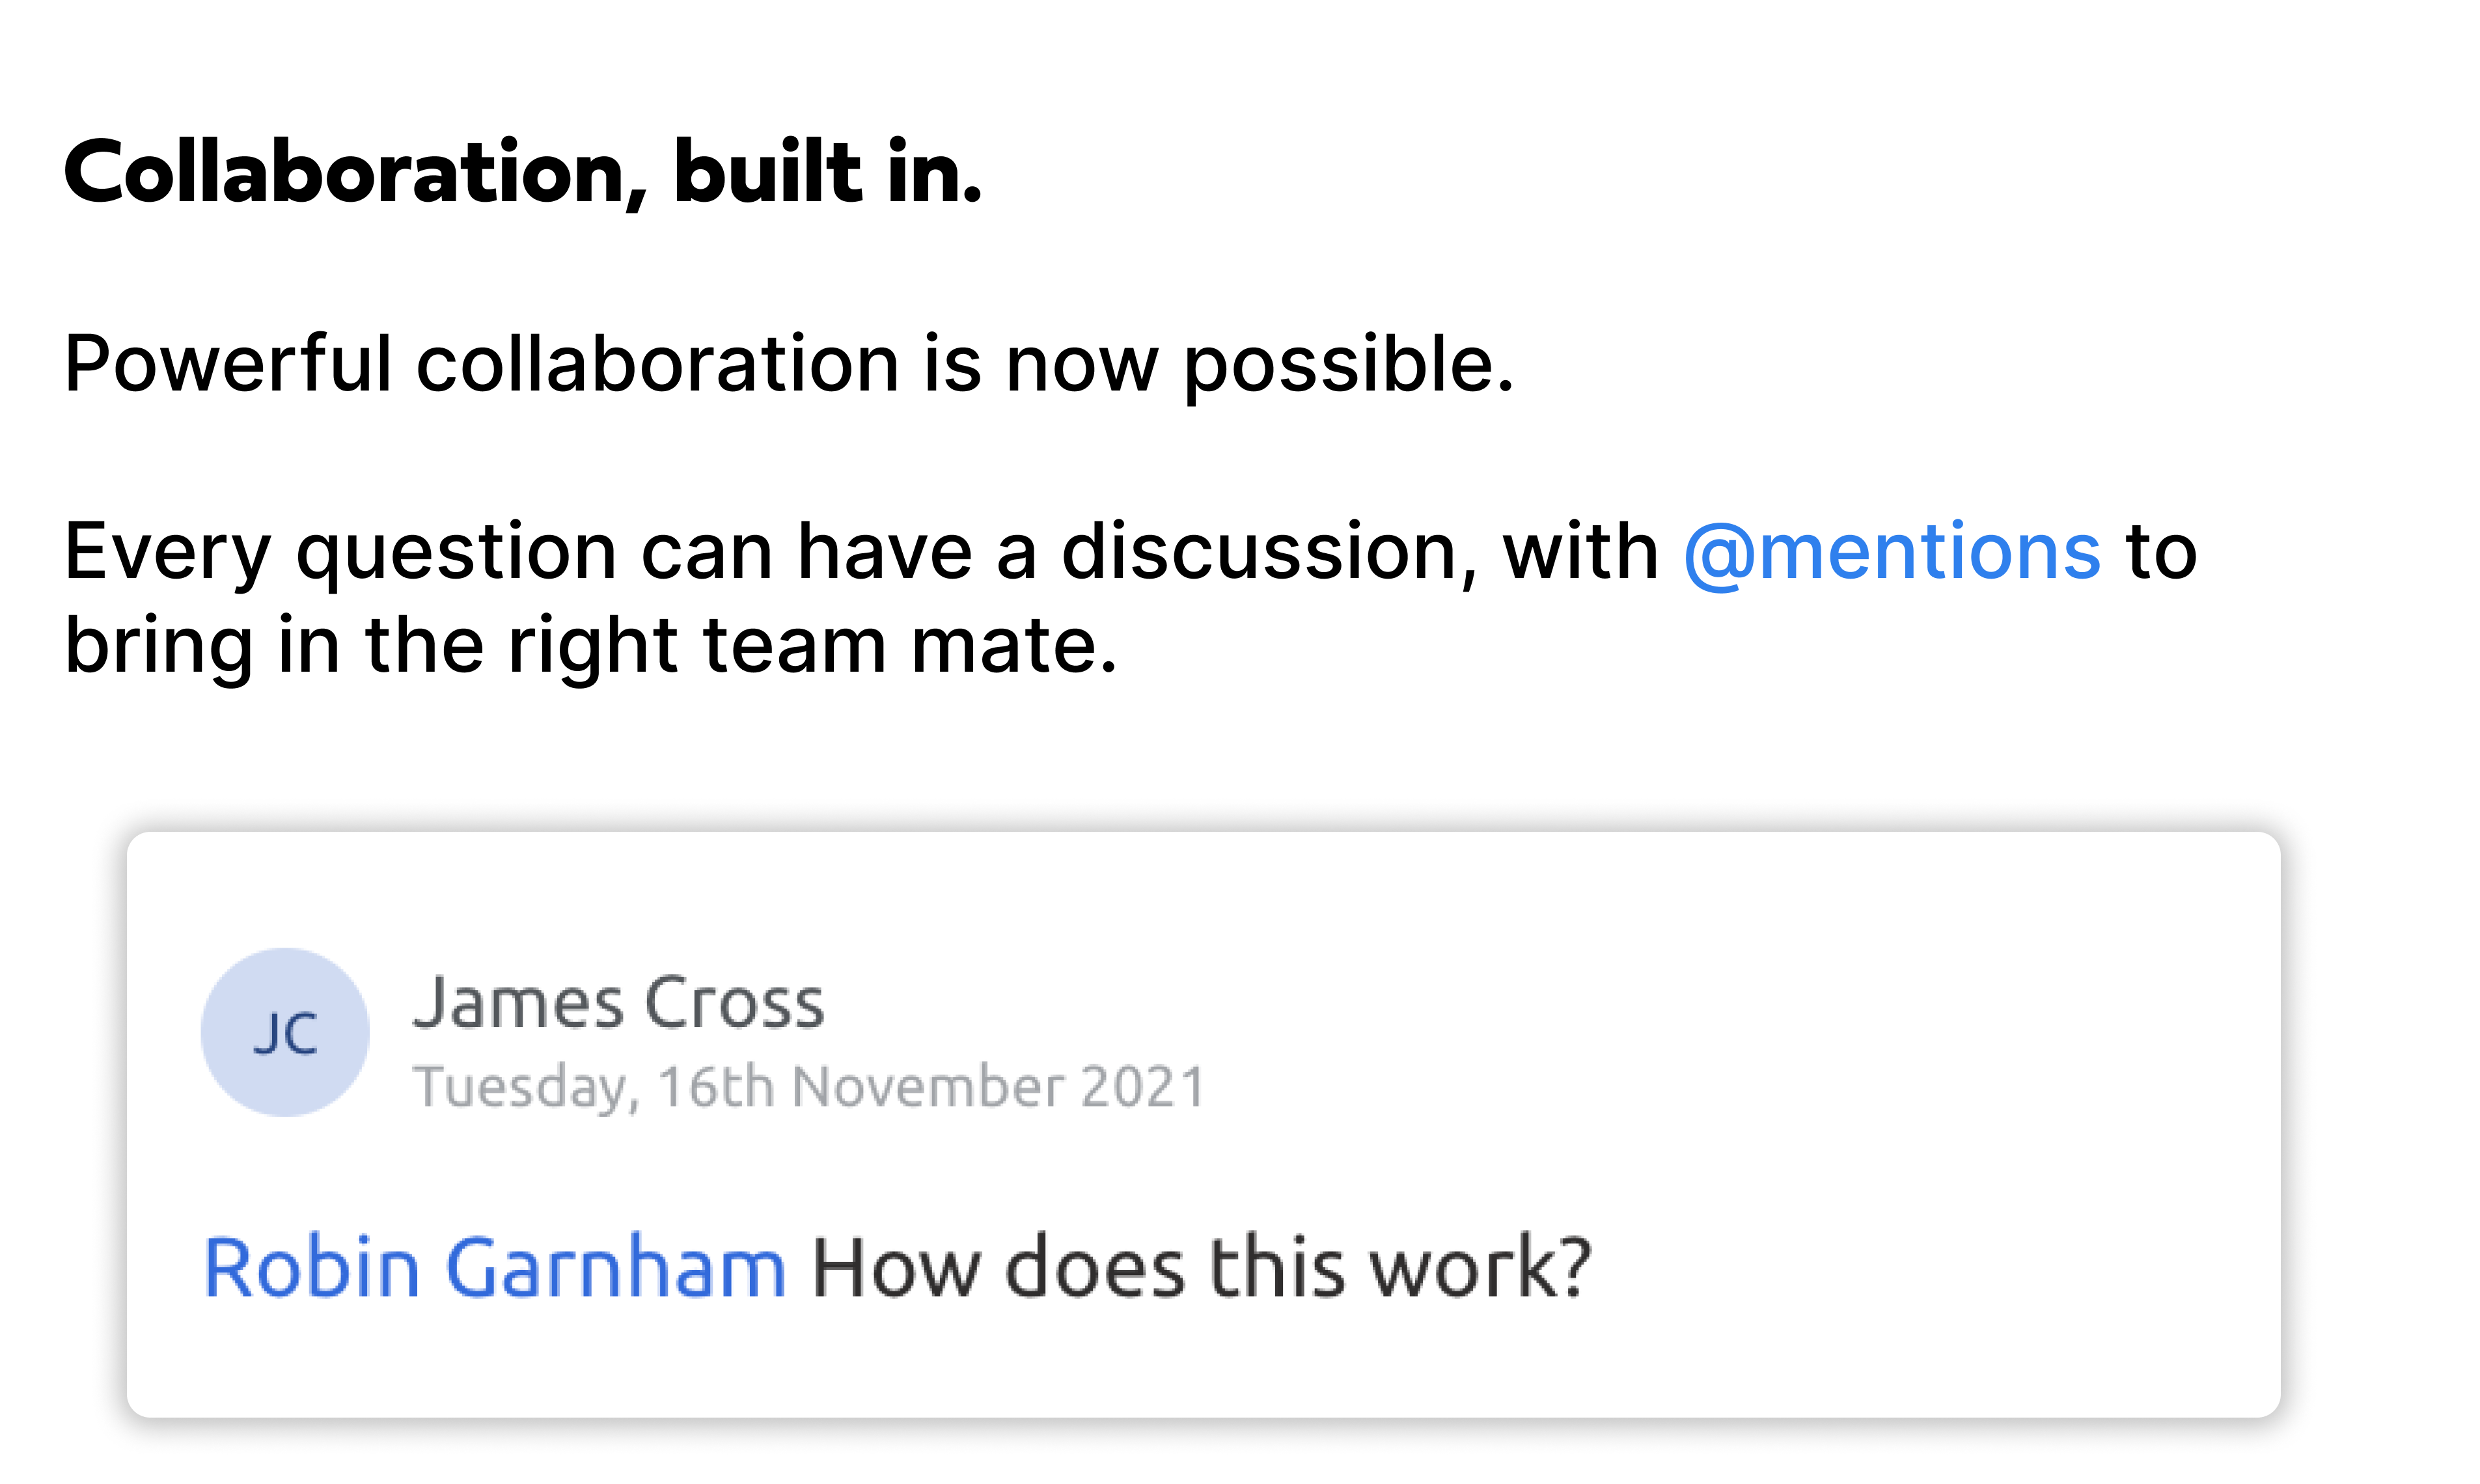 Build in collaboration and @mentions to get the right people in the conversation